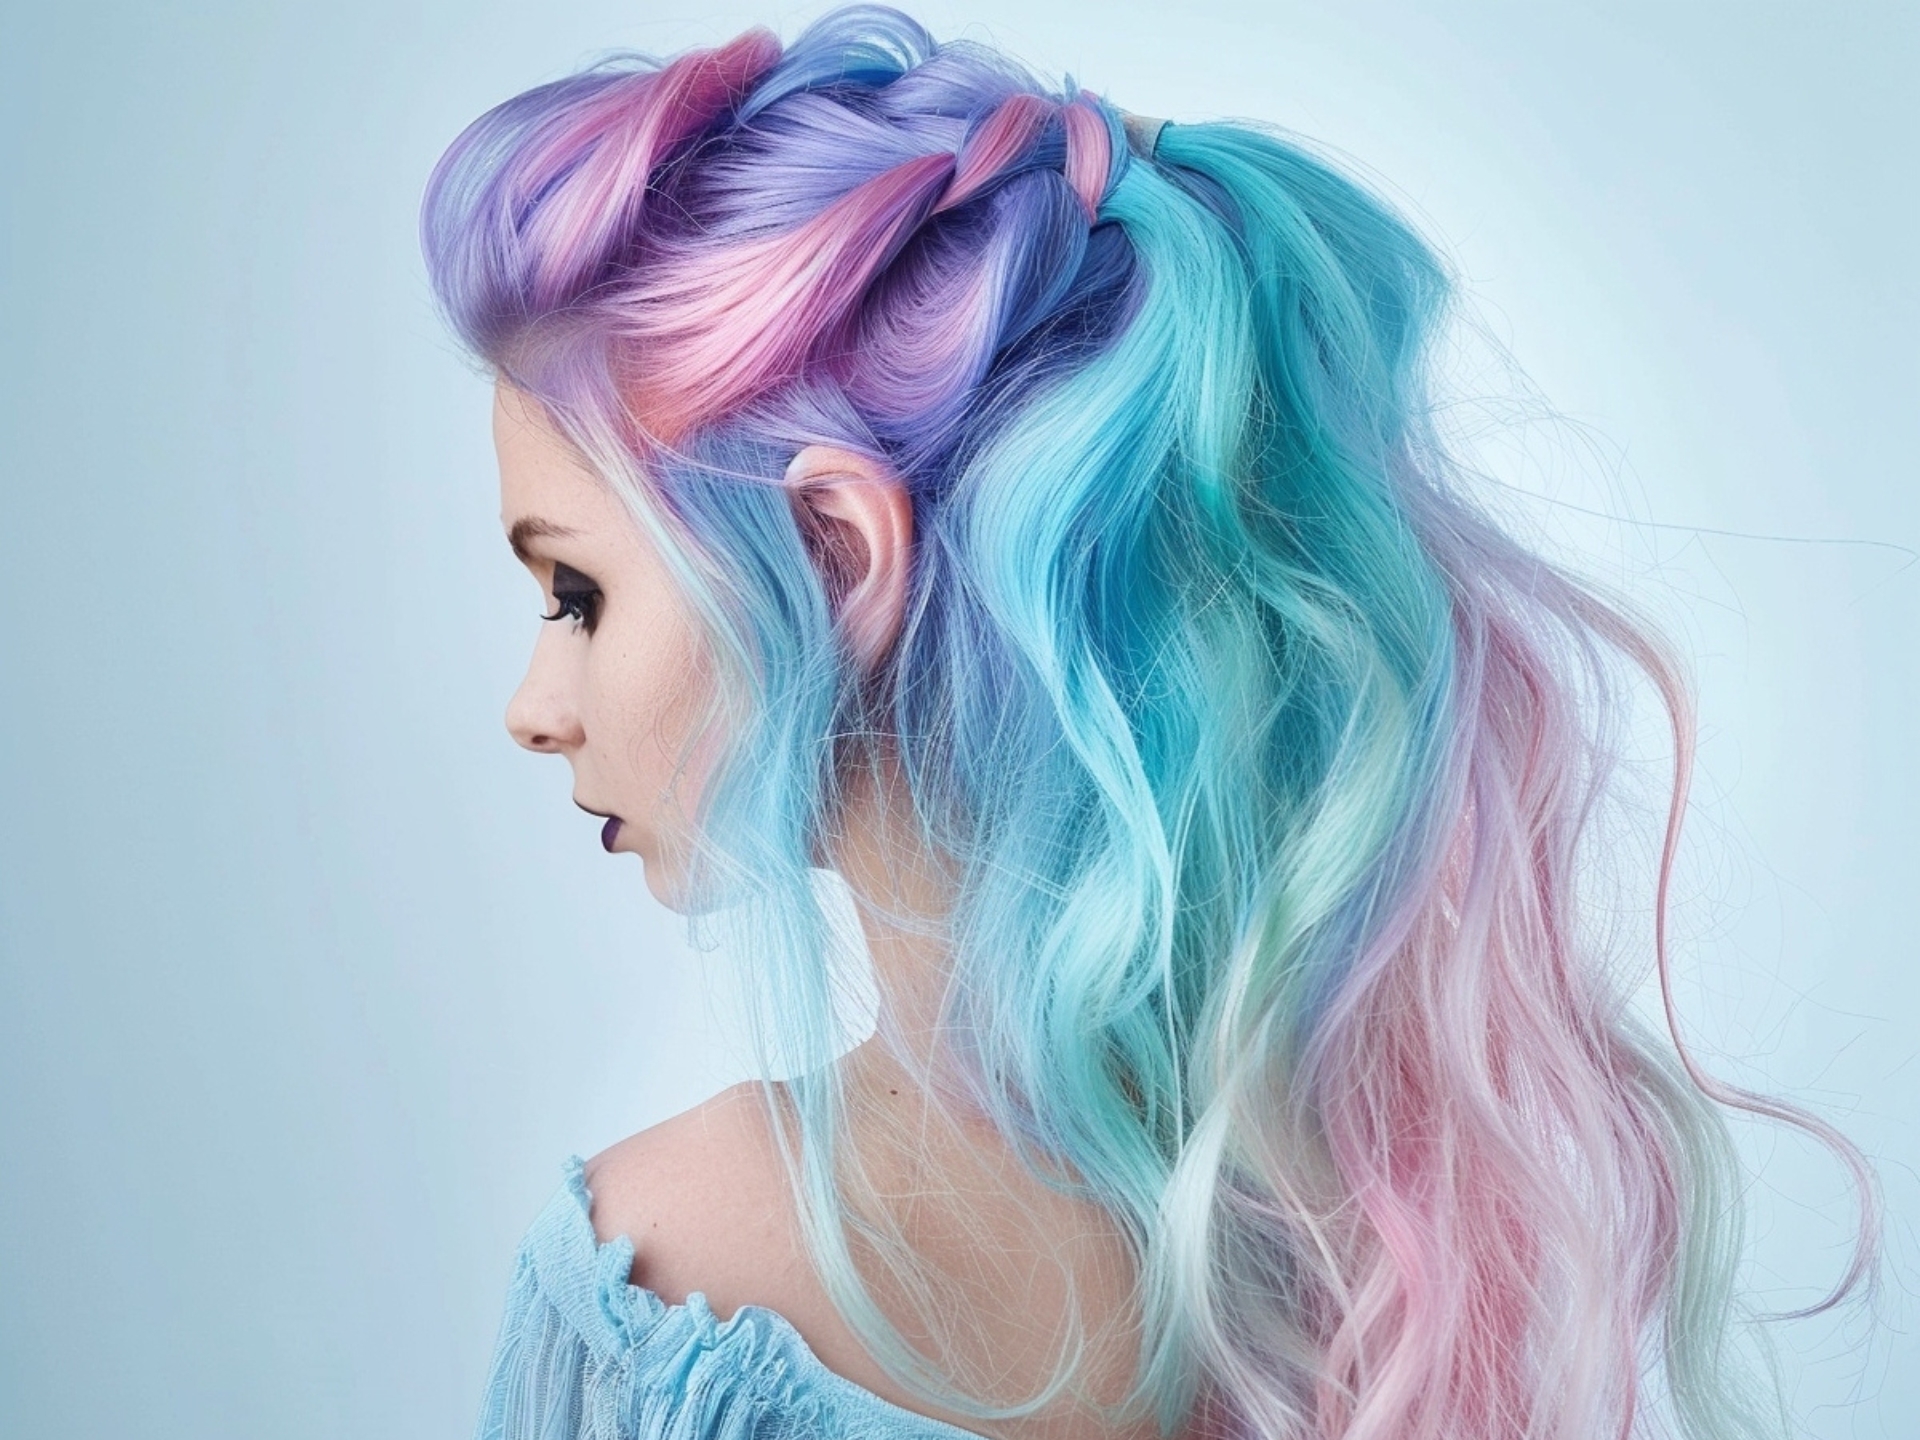 20 Unique Cotton Candy Hair Ideas For A Super Sweet Look